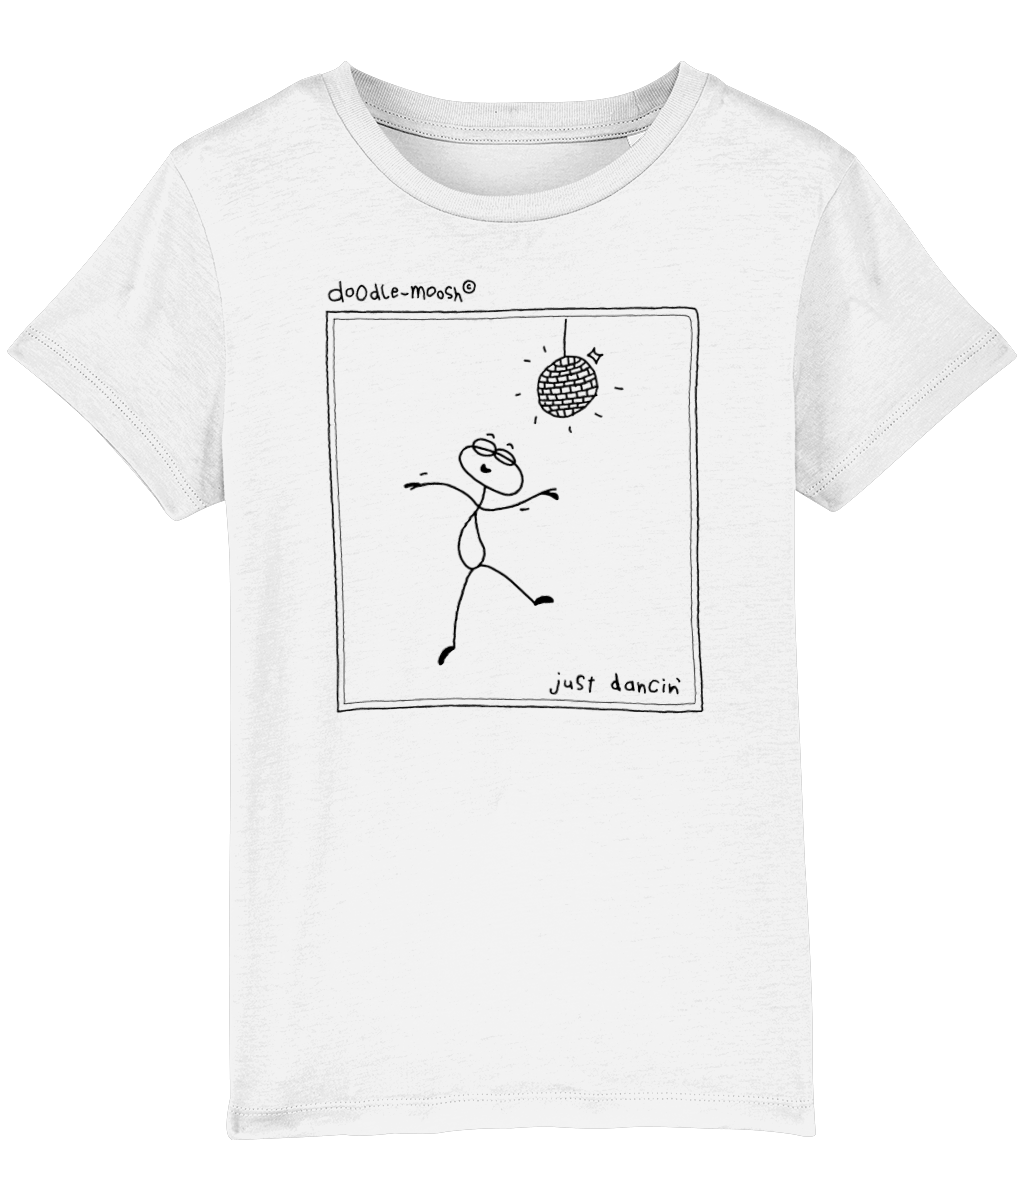 Just dancing t-shirt, white with black